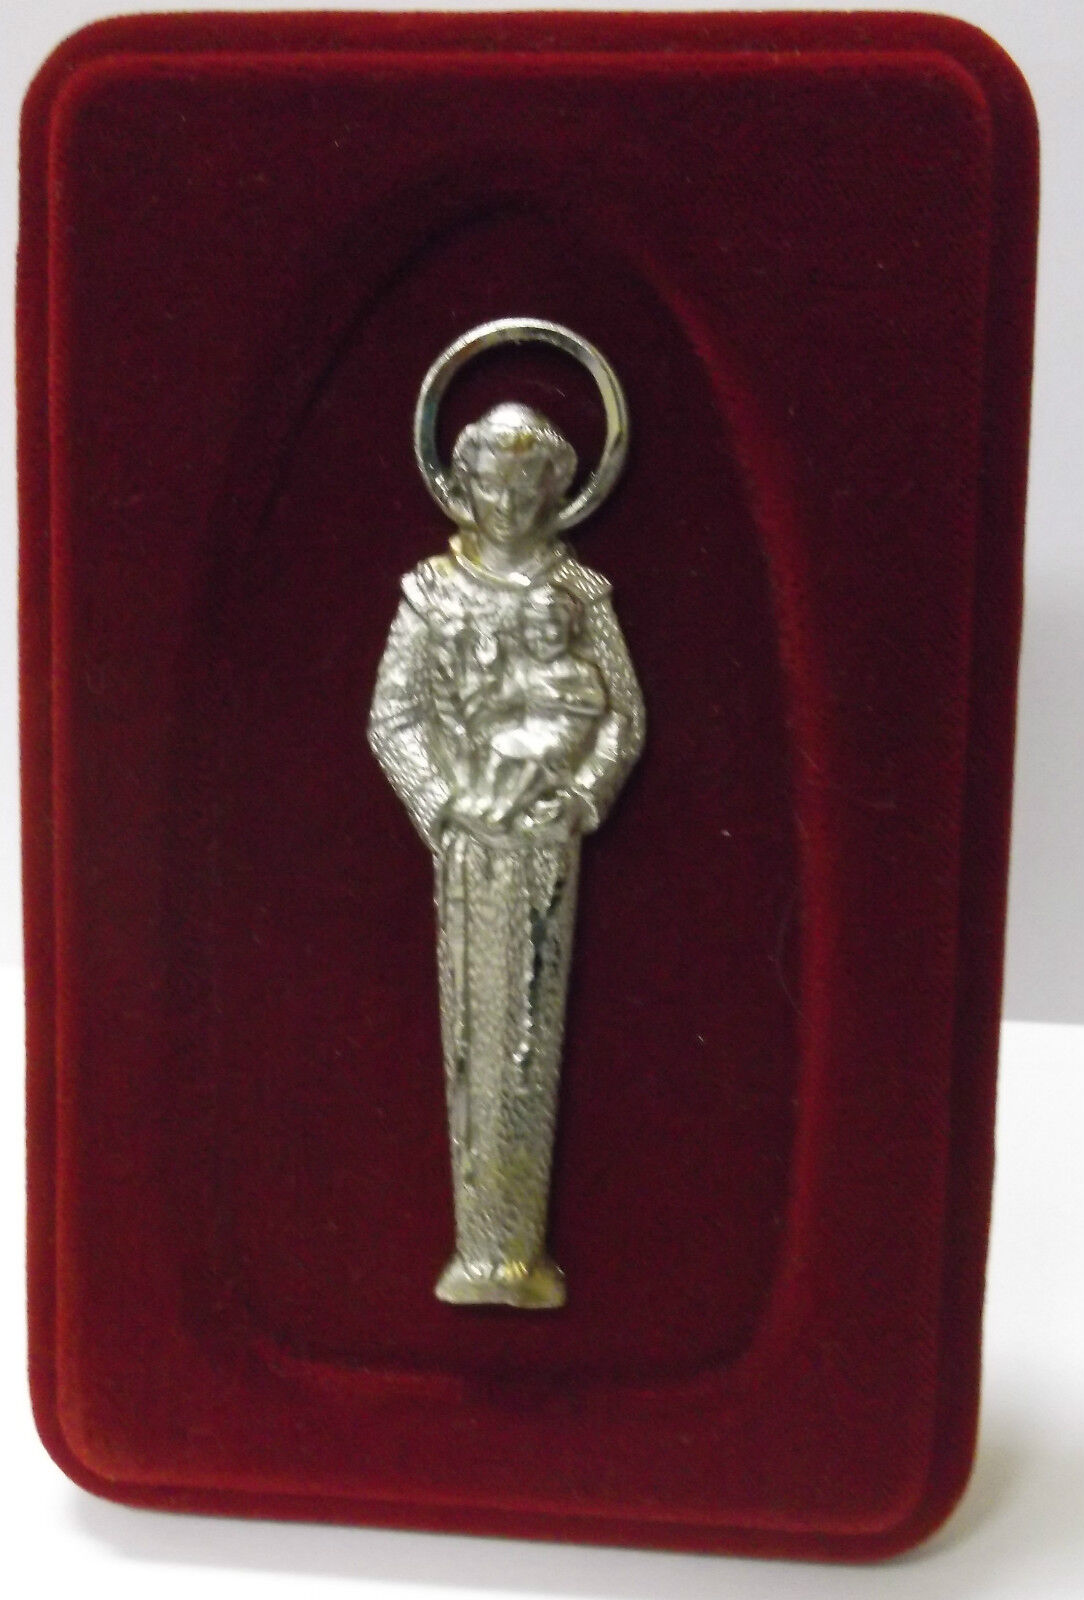 Saint Anthony Pewter Image  Engraved on Red Velvet Frame, New from Italy - Bob and Penny Lord